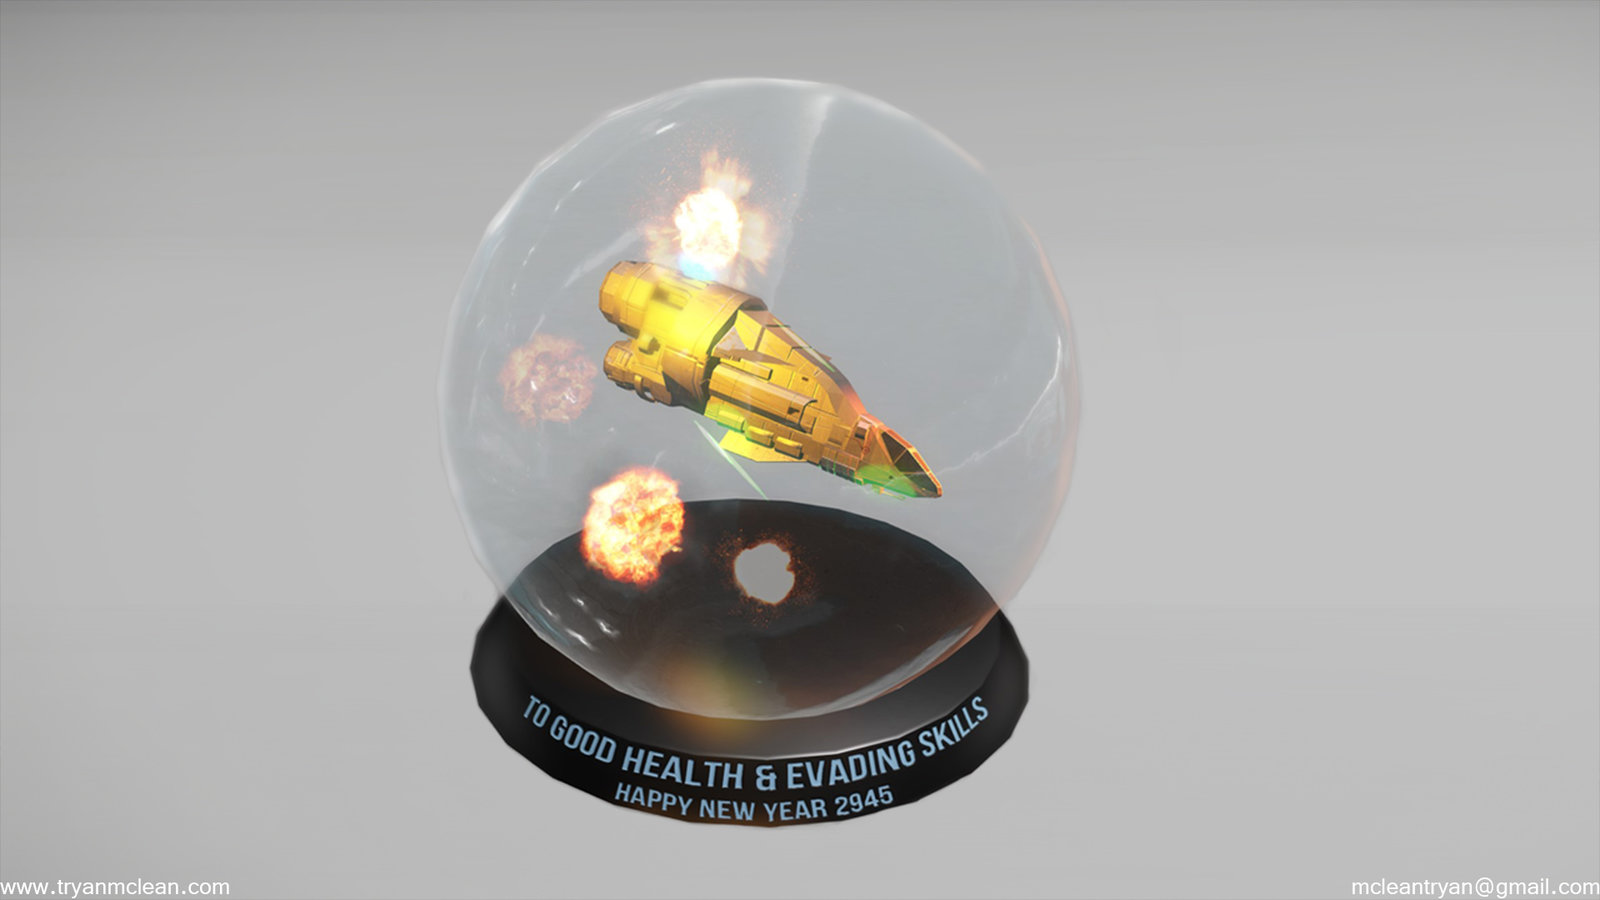 Star Citizen Year End Space Globe. Subscriber Flair. Modelling by myself from 3D Concept. VFX done at CIG Austin.